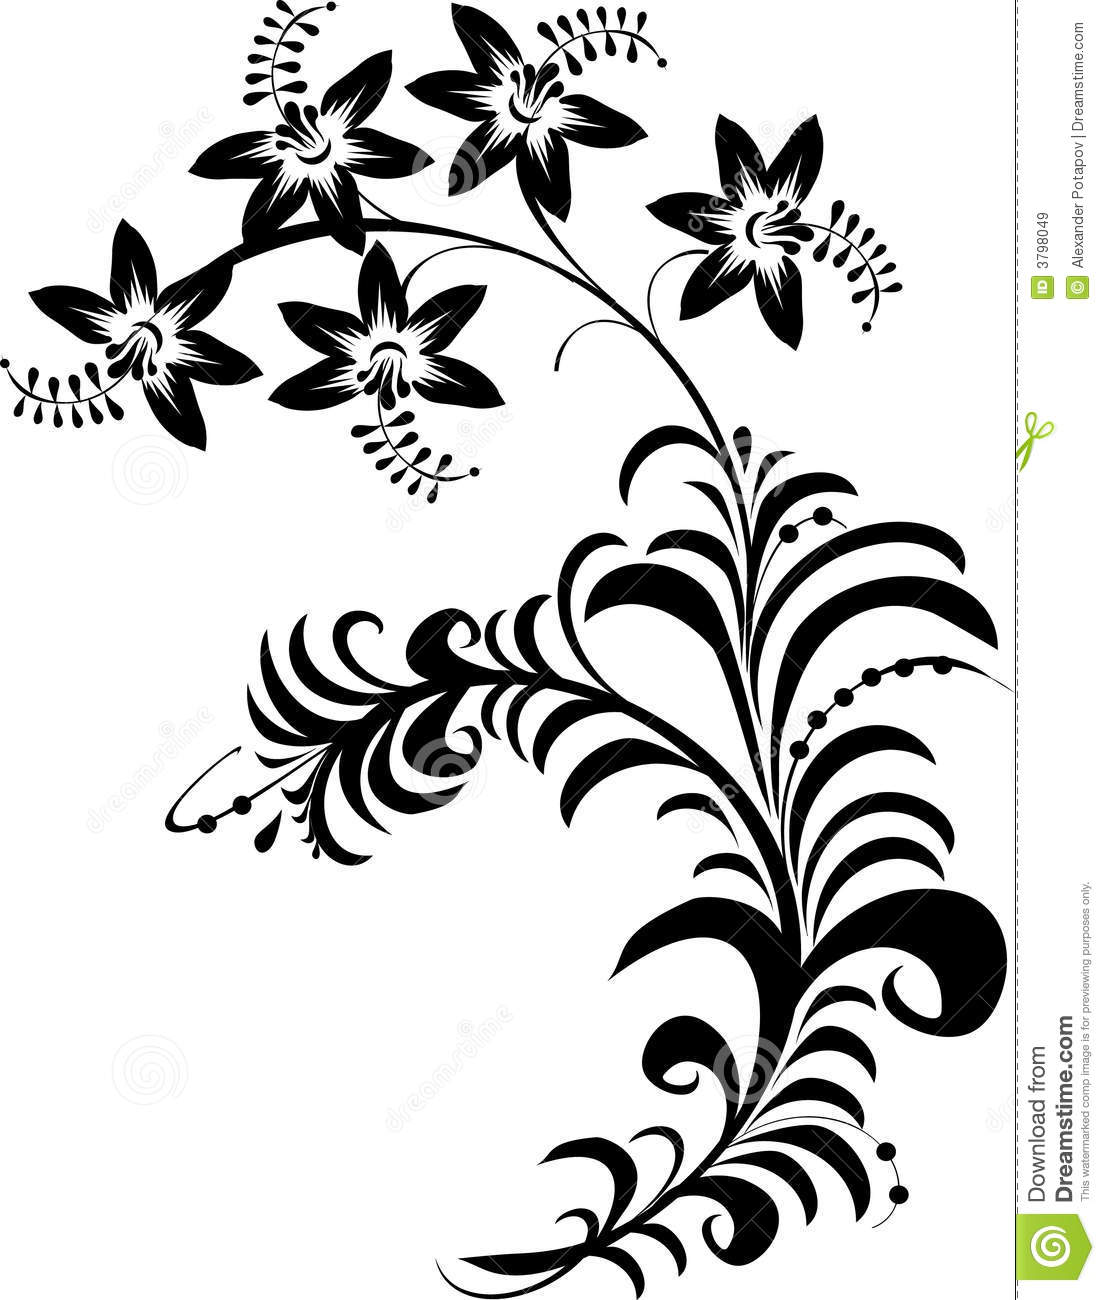 Black And White Flowers Royalty Free Stock Images   Image  3798049